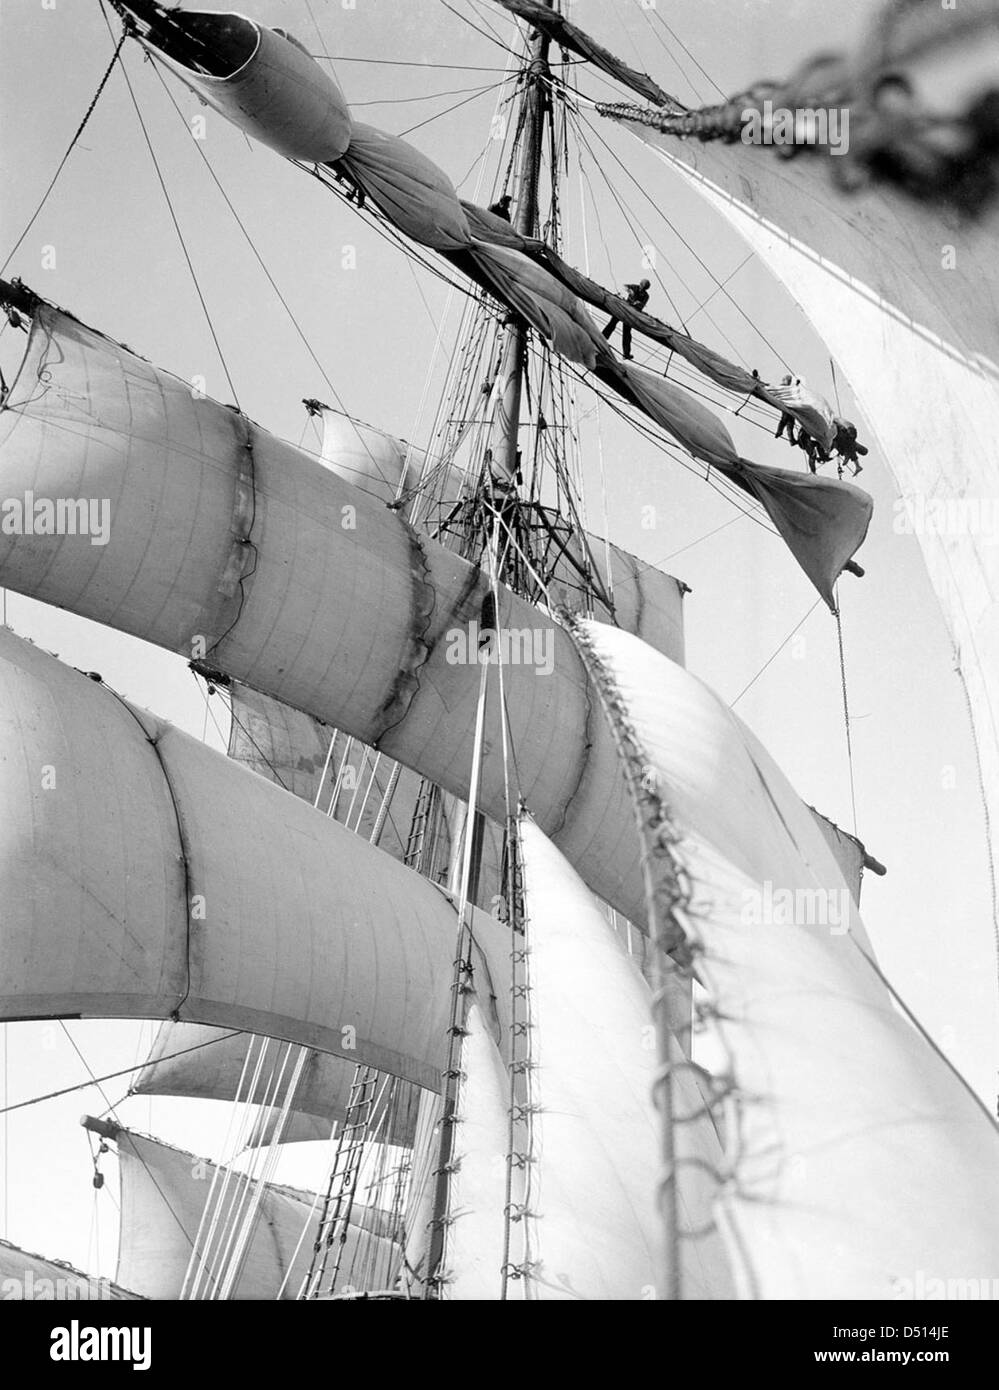 Looking aloft at the foremast of the 'Parma' Stock Photo